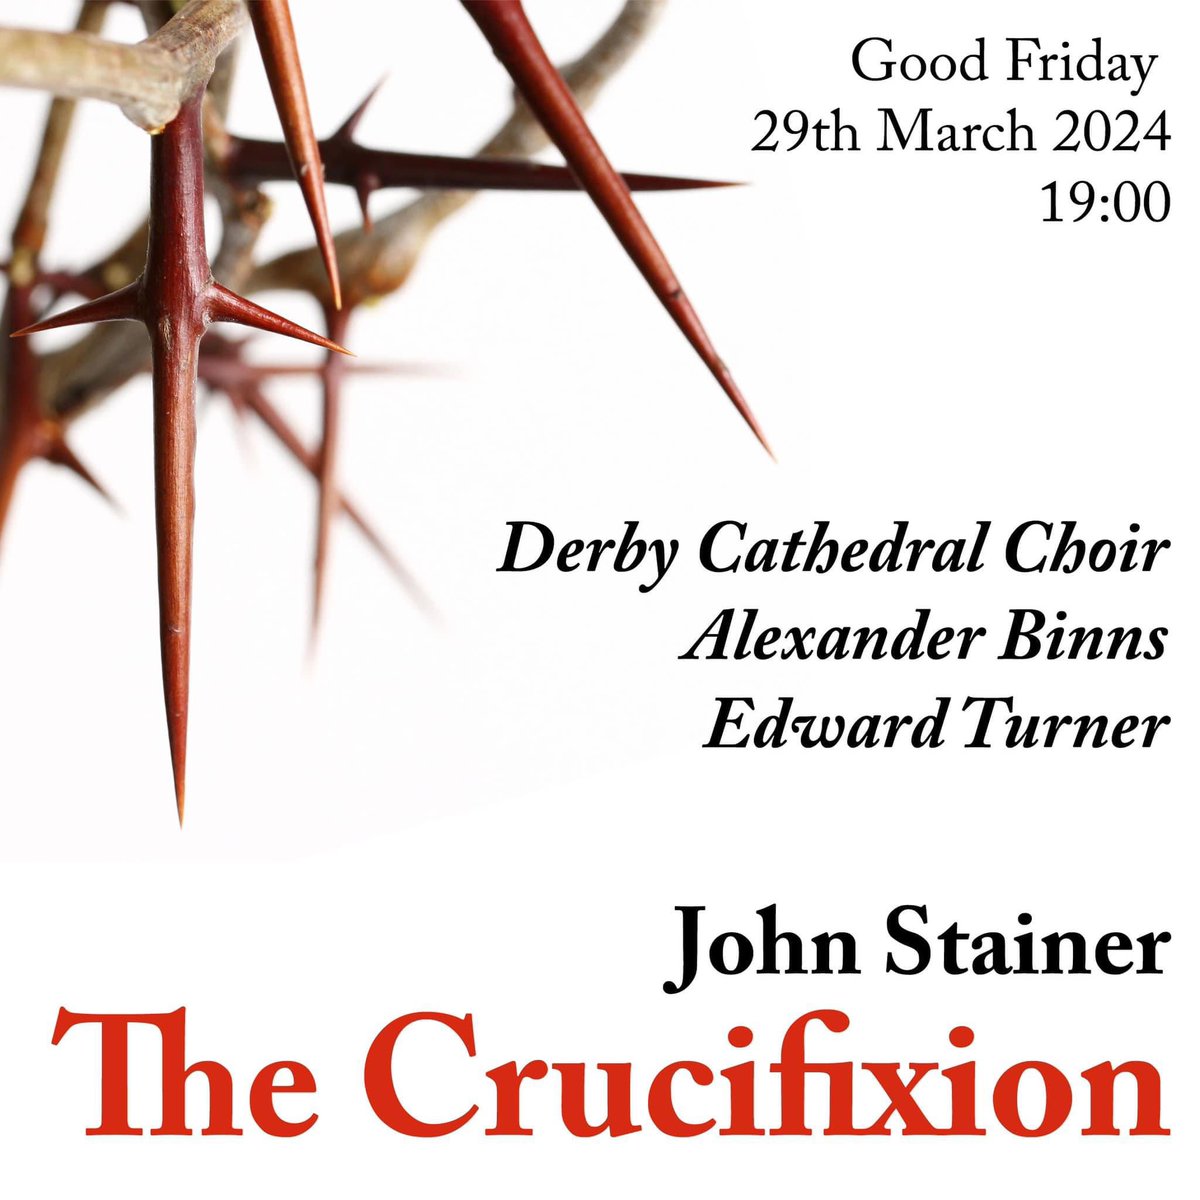 Join us TONIGHT for a performance of The Crucifixion by John Stainer with the Cathedral Choir.